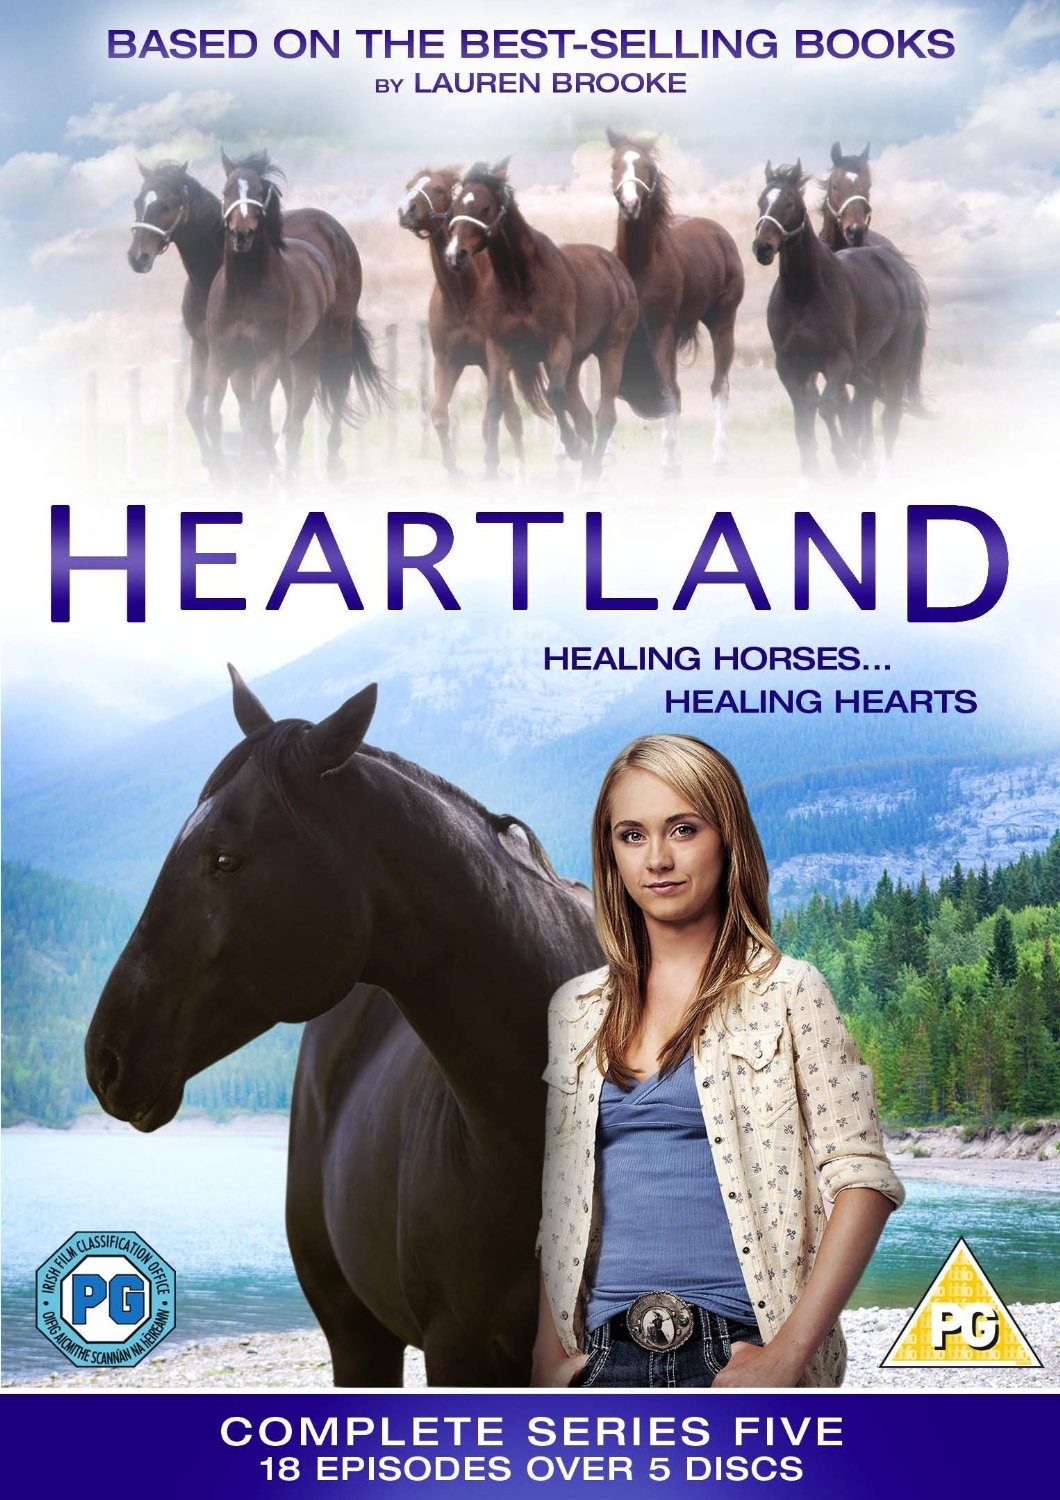 Heartland The Complete Series Five DVD Box Set from trot-online